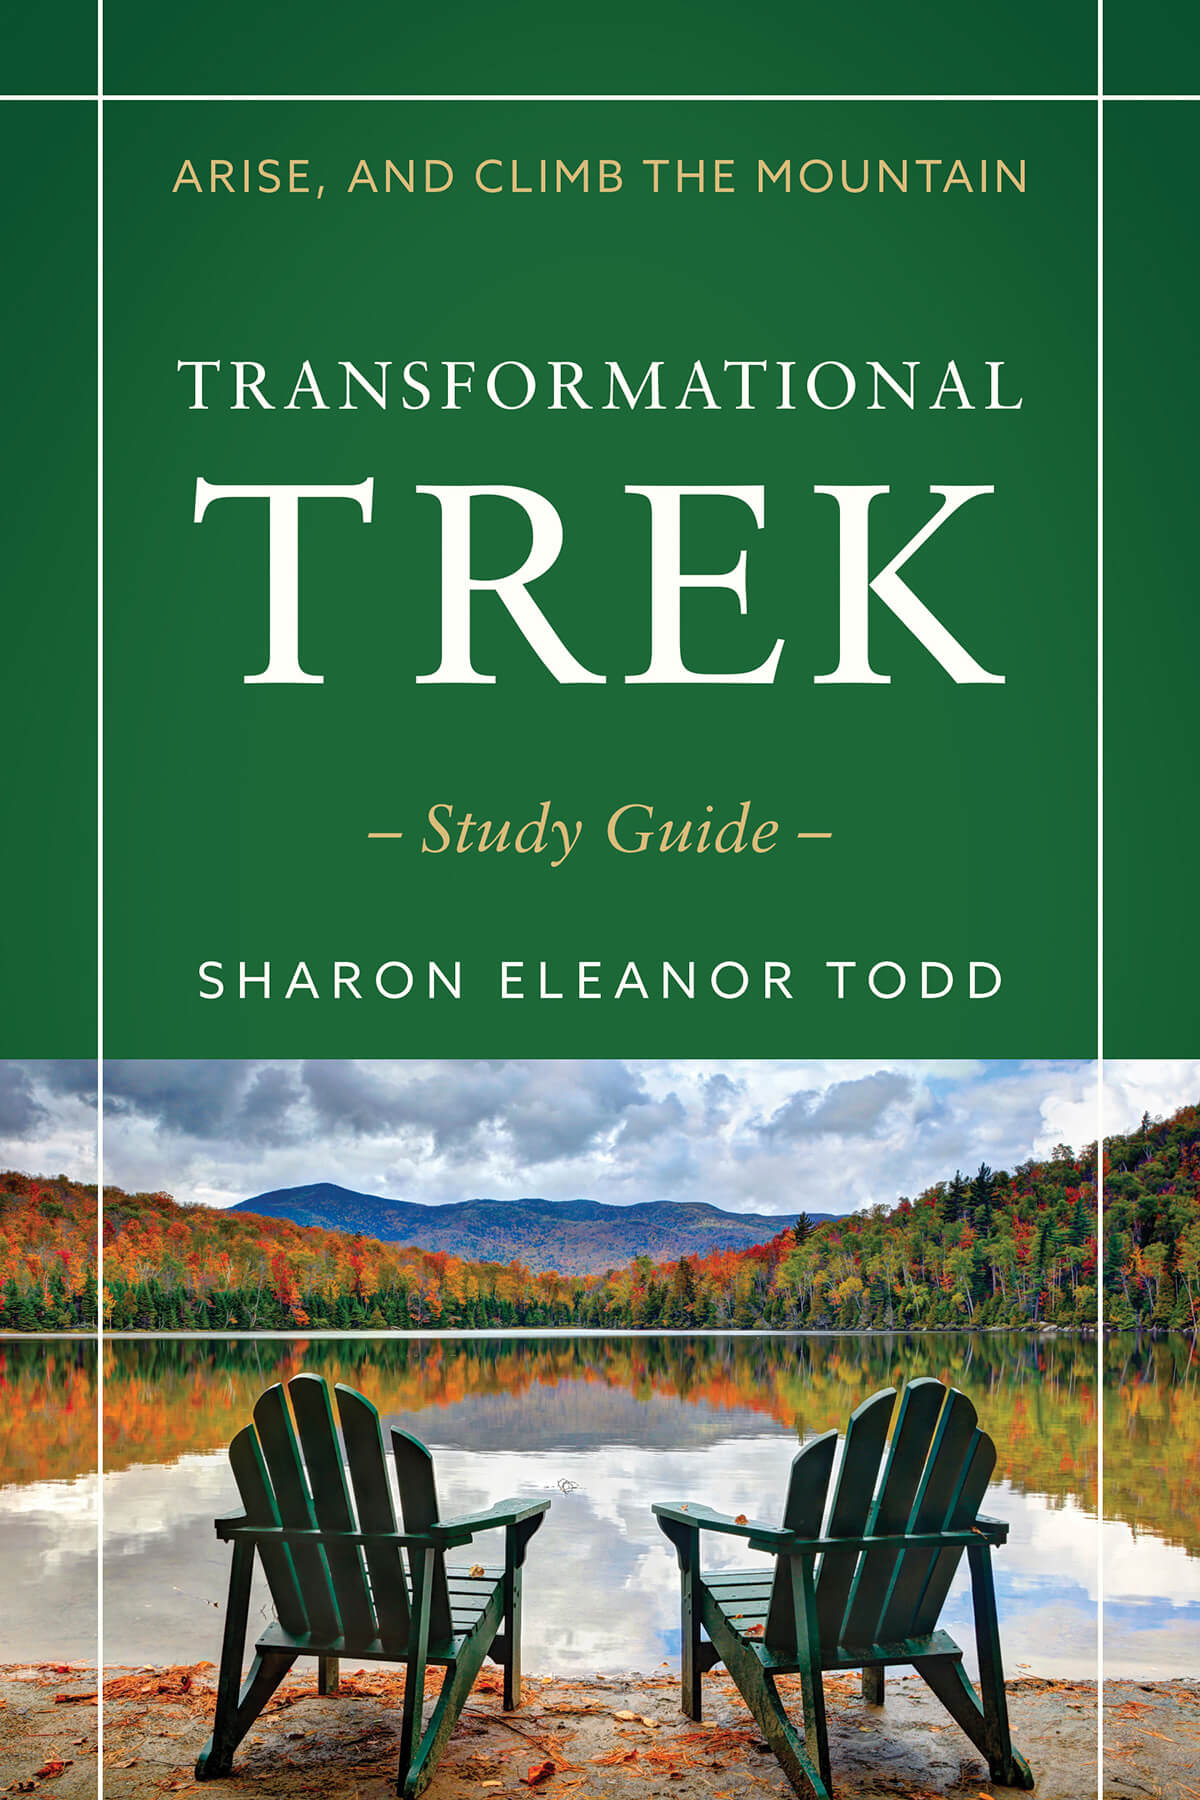 Arise, and Climb The Mountain - Transformational Trek Study Guide by Sharon Eleanor Todd